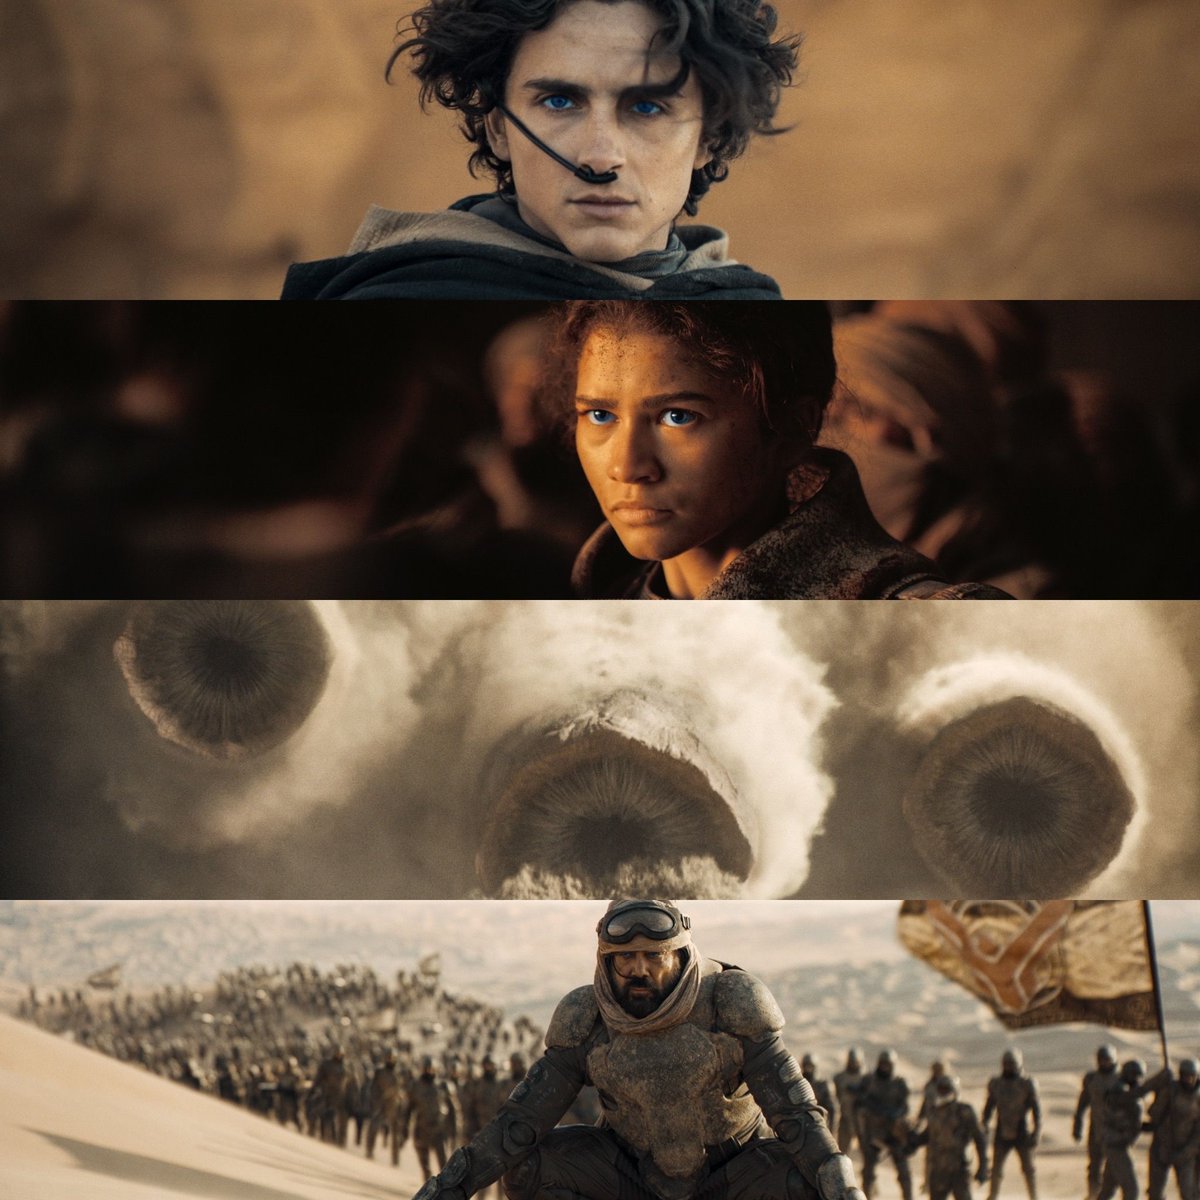 Moving over for a 2nd week to your #nonprofit #BijouByTheBay is the critically acclaimed #Dune2! Don’t miss this incredible movie! #elkrapids #PureMichigan #Kalkaska #Leland #NorthwesternMichiganCollege #traversecity